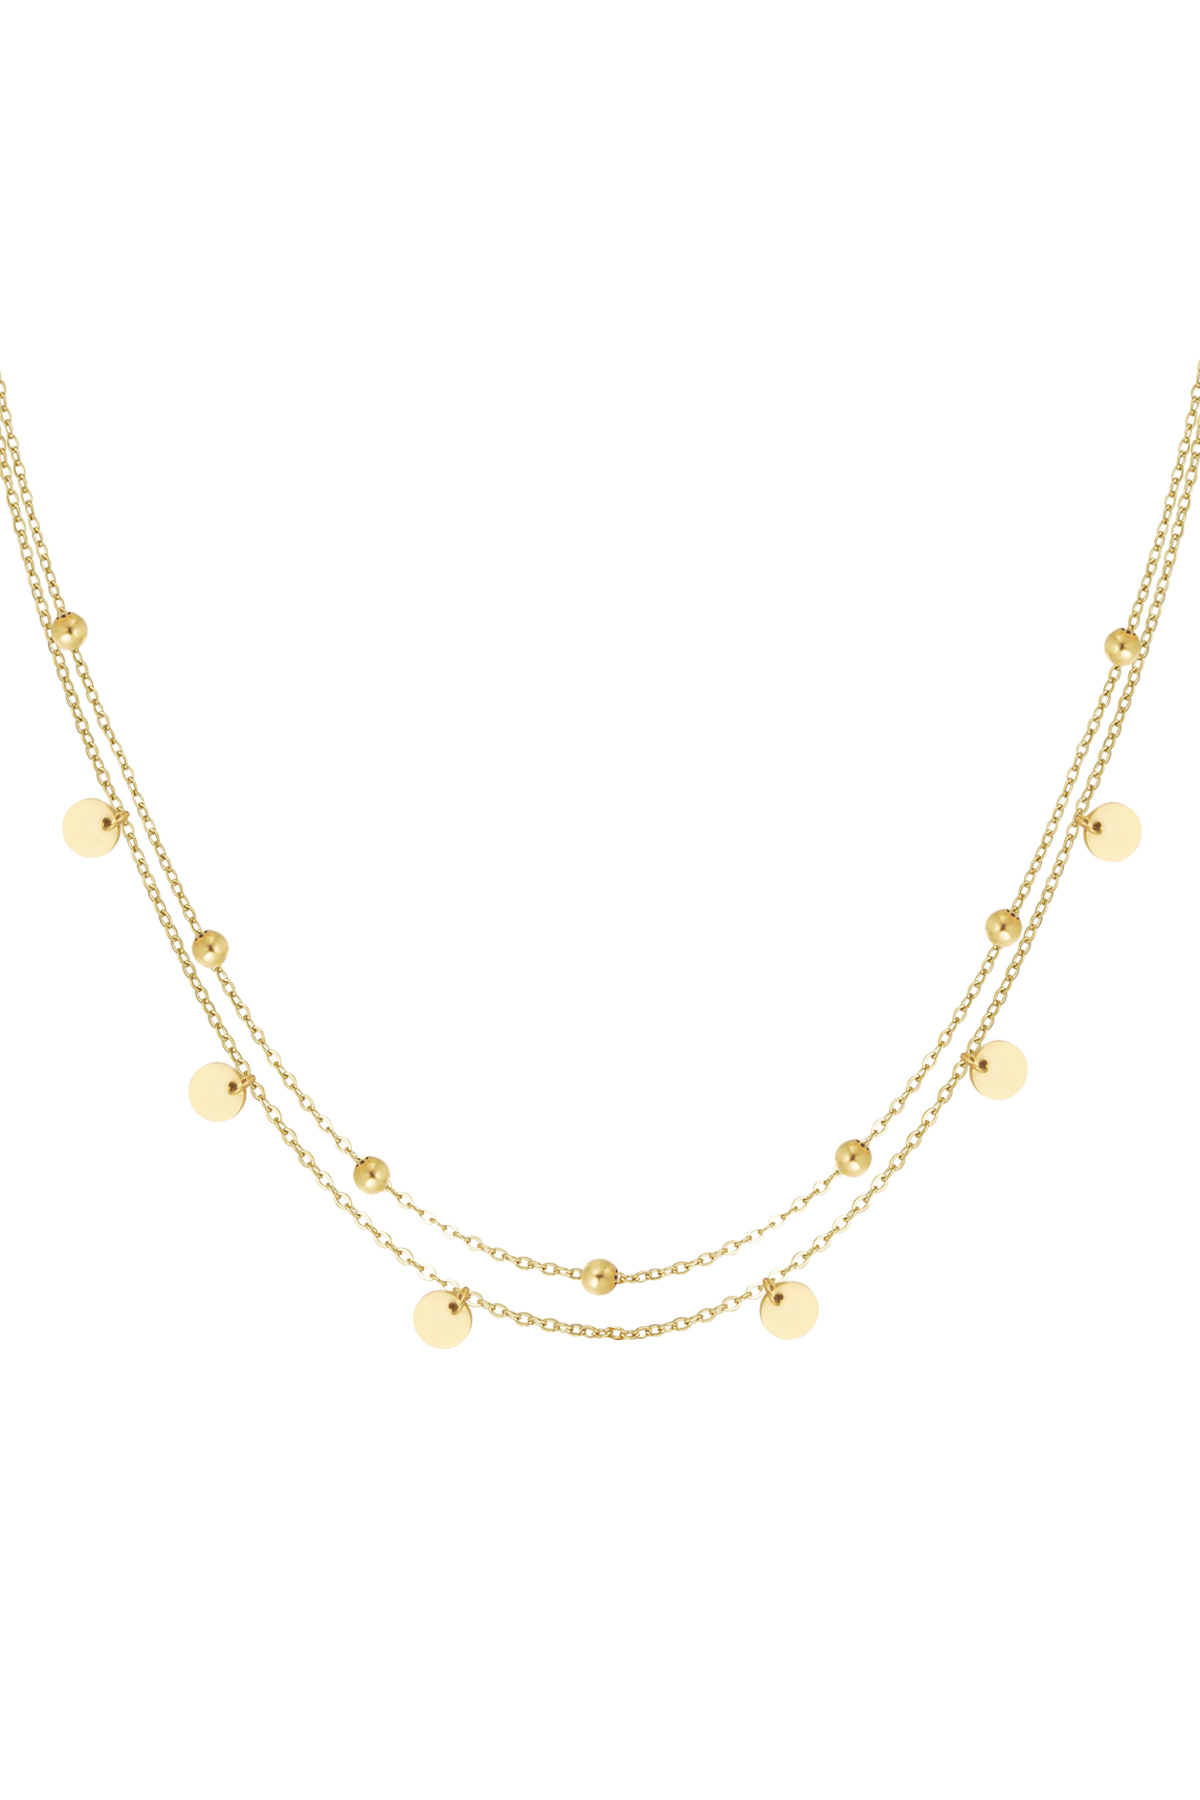 Necklace balls and circles - gold